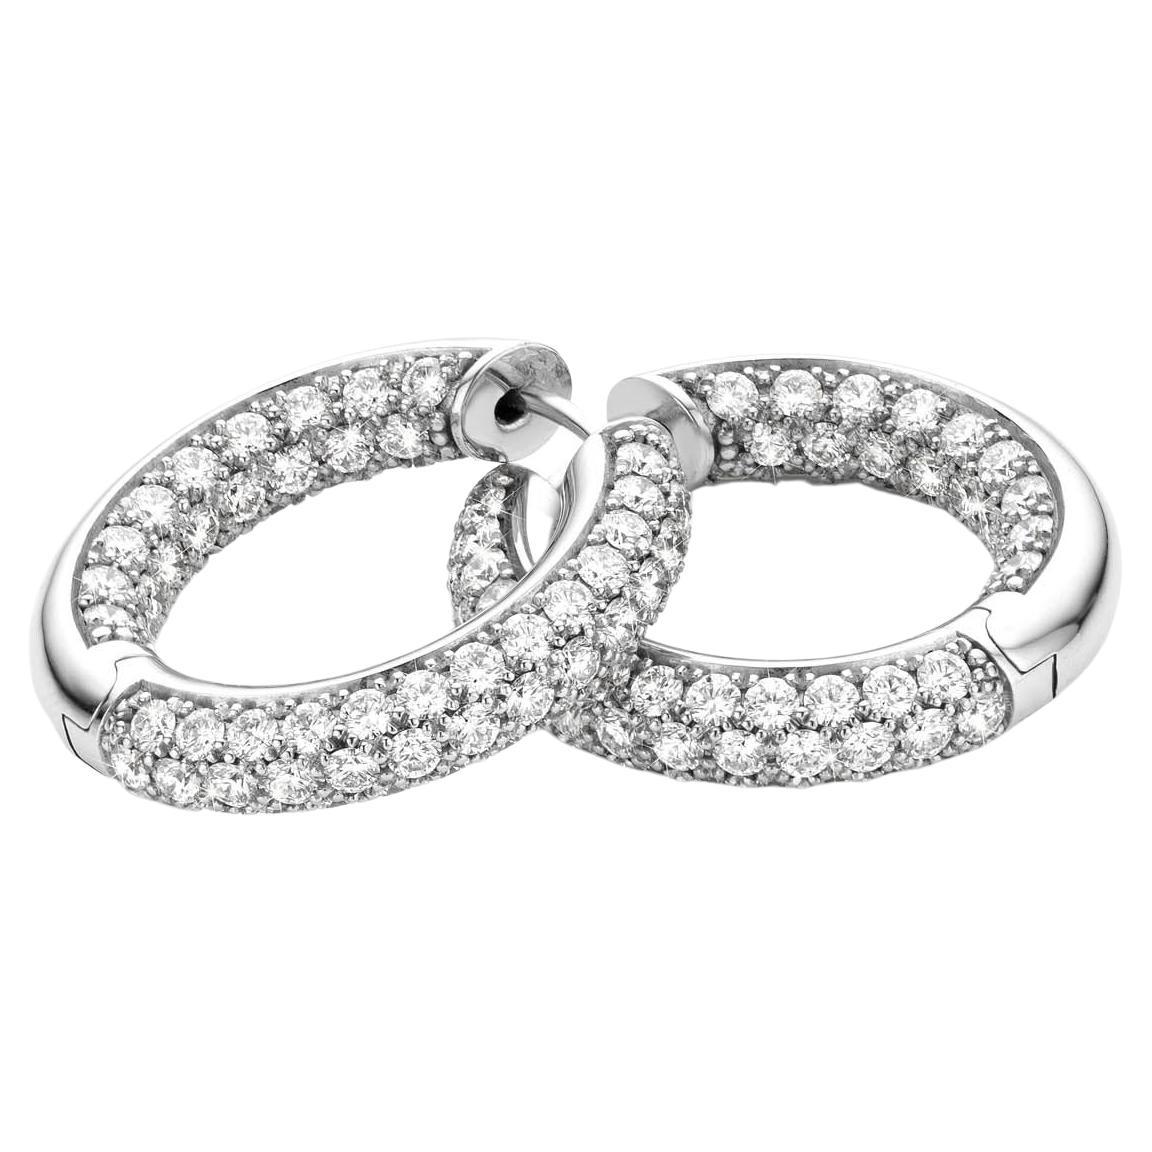 Cober with 134 Brilliant-cut Diamonds with total weight 3.90 Carat Pavé Earrings For Sale